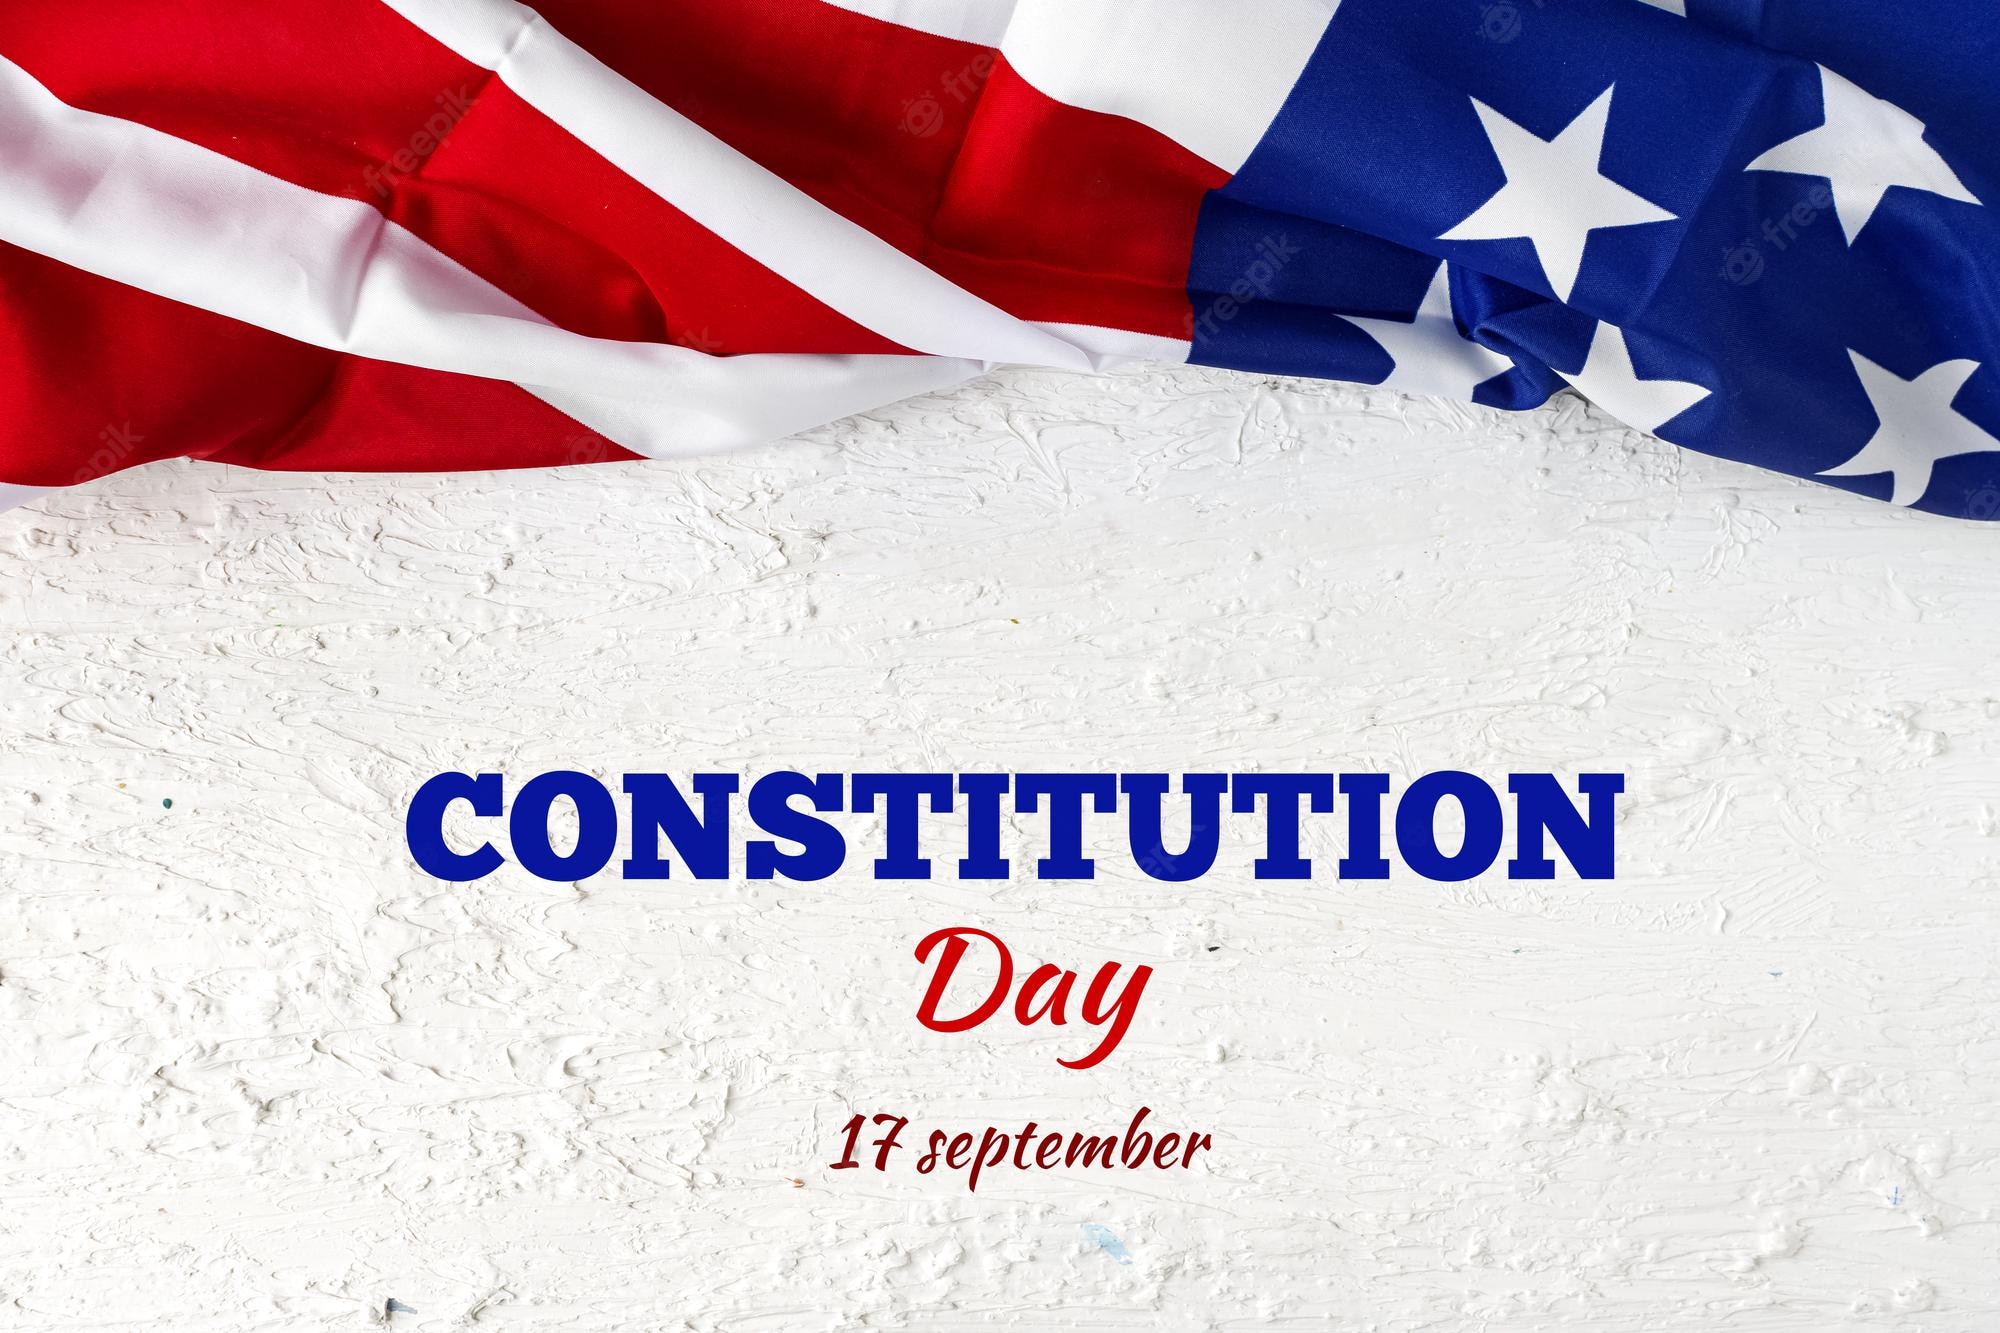 Constitution Day In The United States 2022: Wishes, Quotes, Messages, Images, Greetings, Slogans, and Sayings to Share